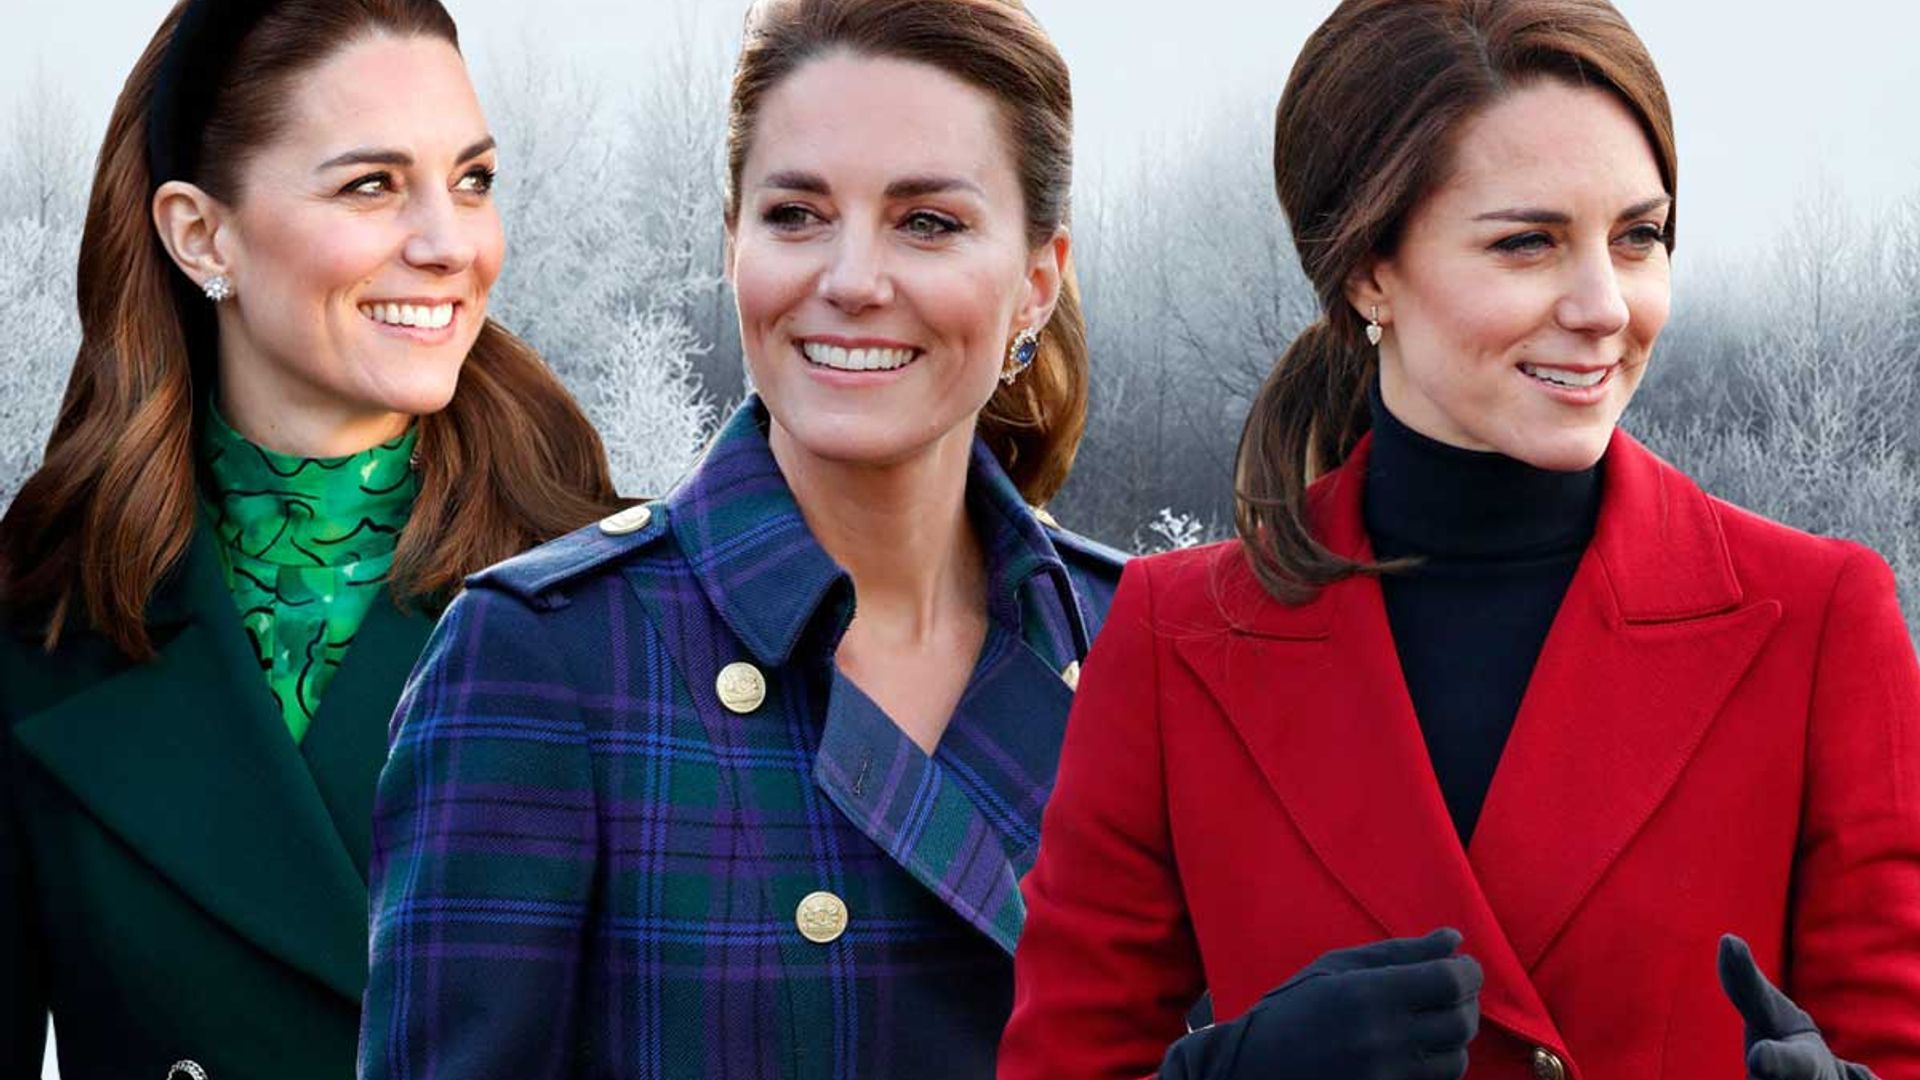 Kate Middleton's incredible winter outfits: 10 cosy looks we love